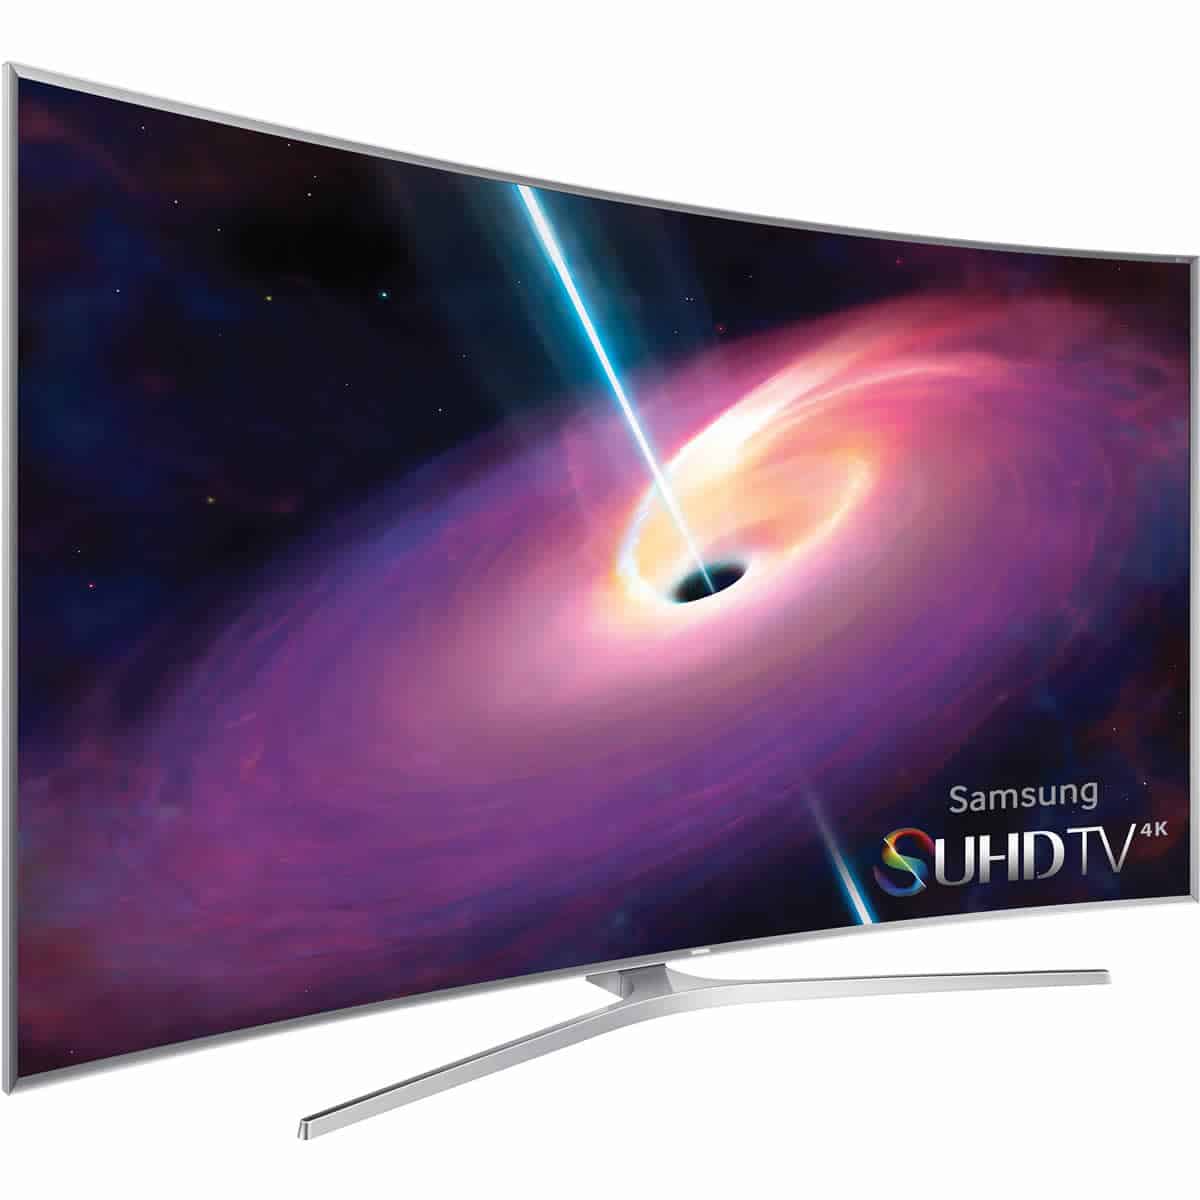 Curved Samsung SUHD Smart TV is a beautiful everyday tech product